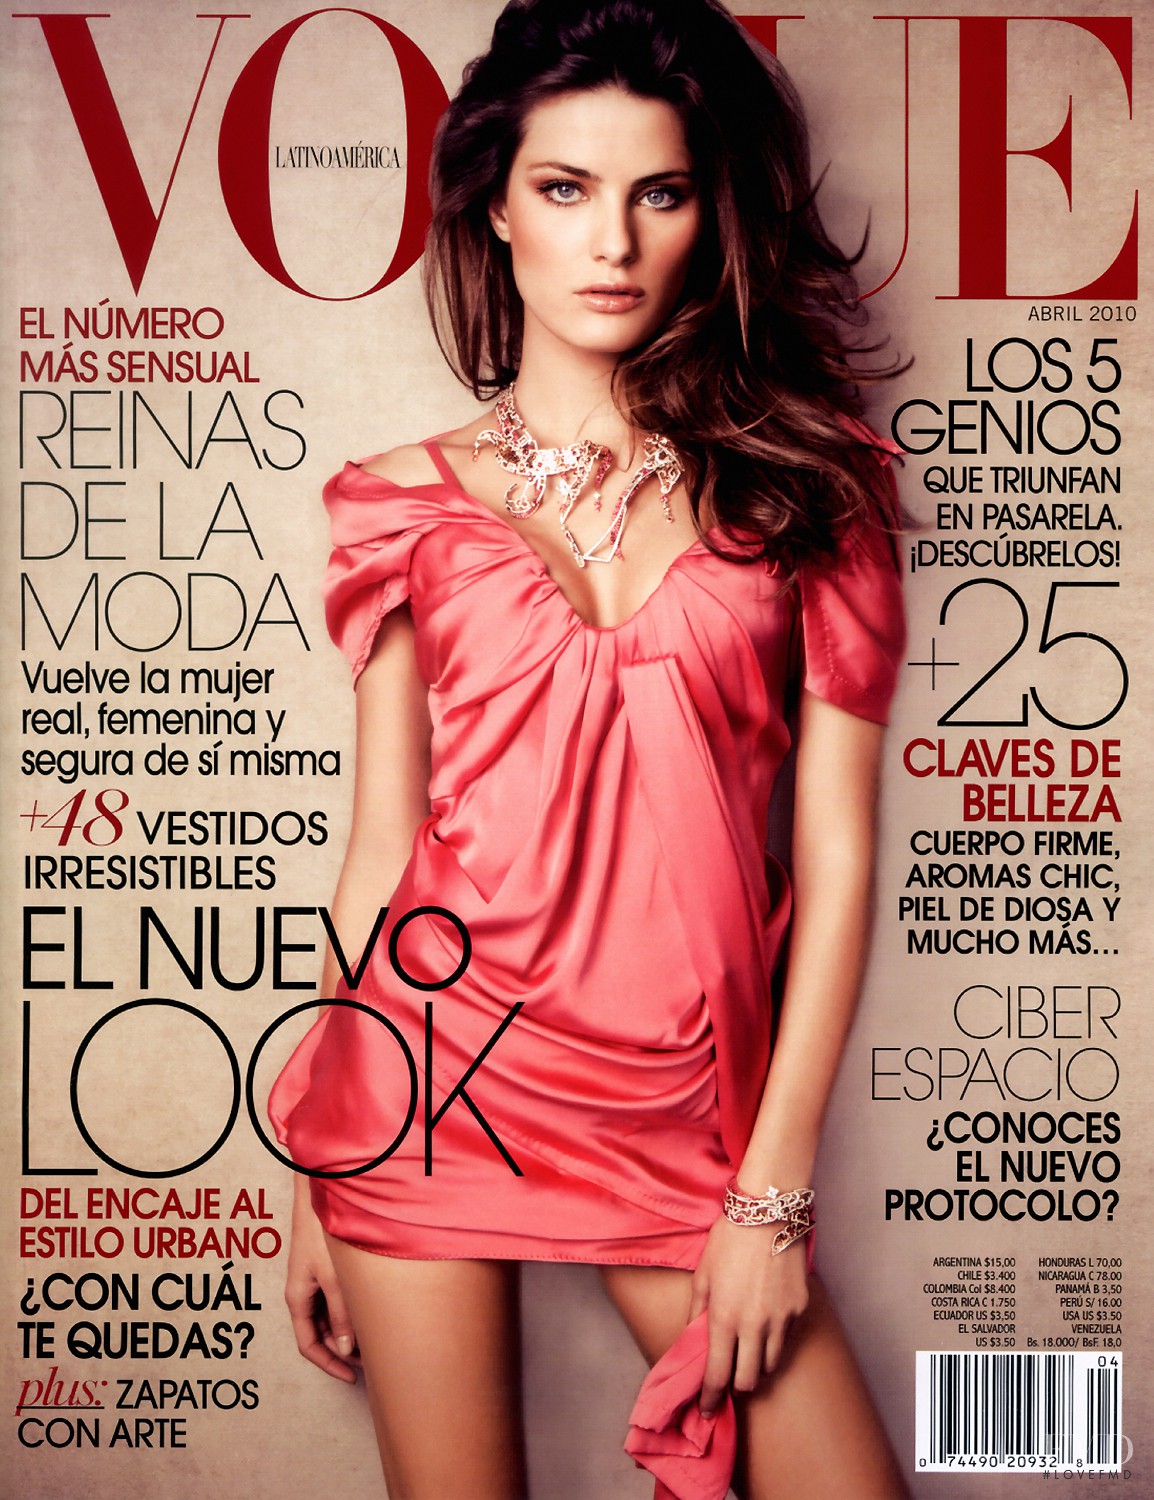 Cover Of Vogue Latin America With Isabeli Fontana April 2010 Id 9995